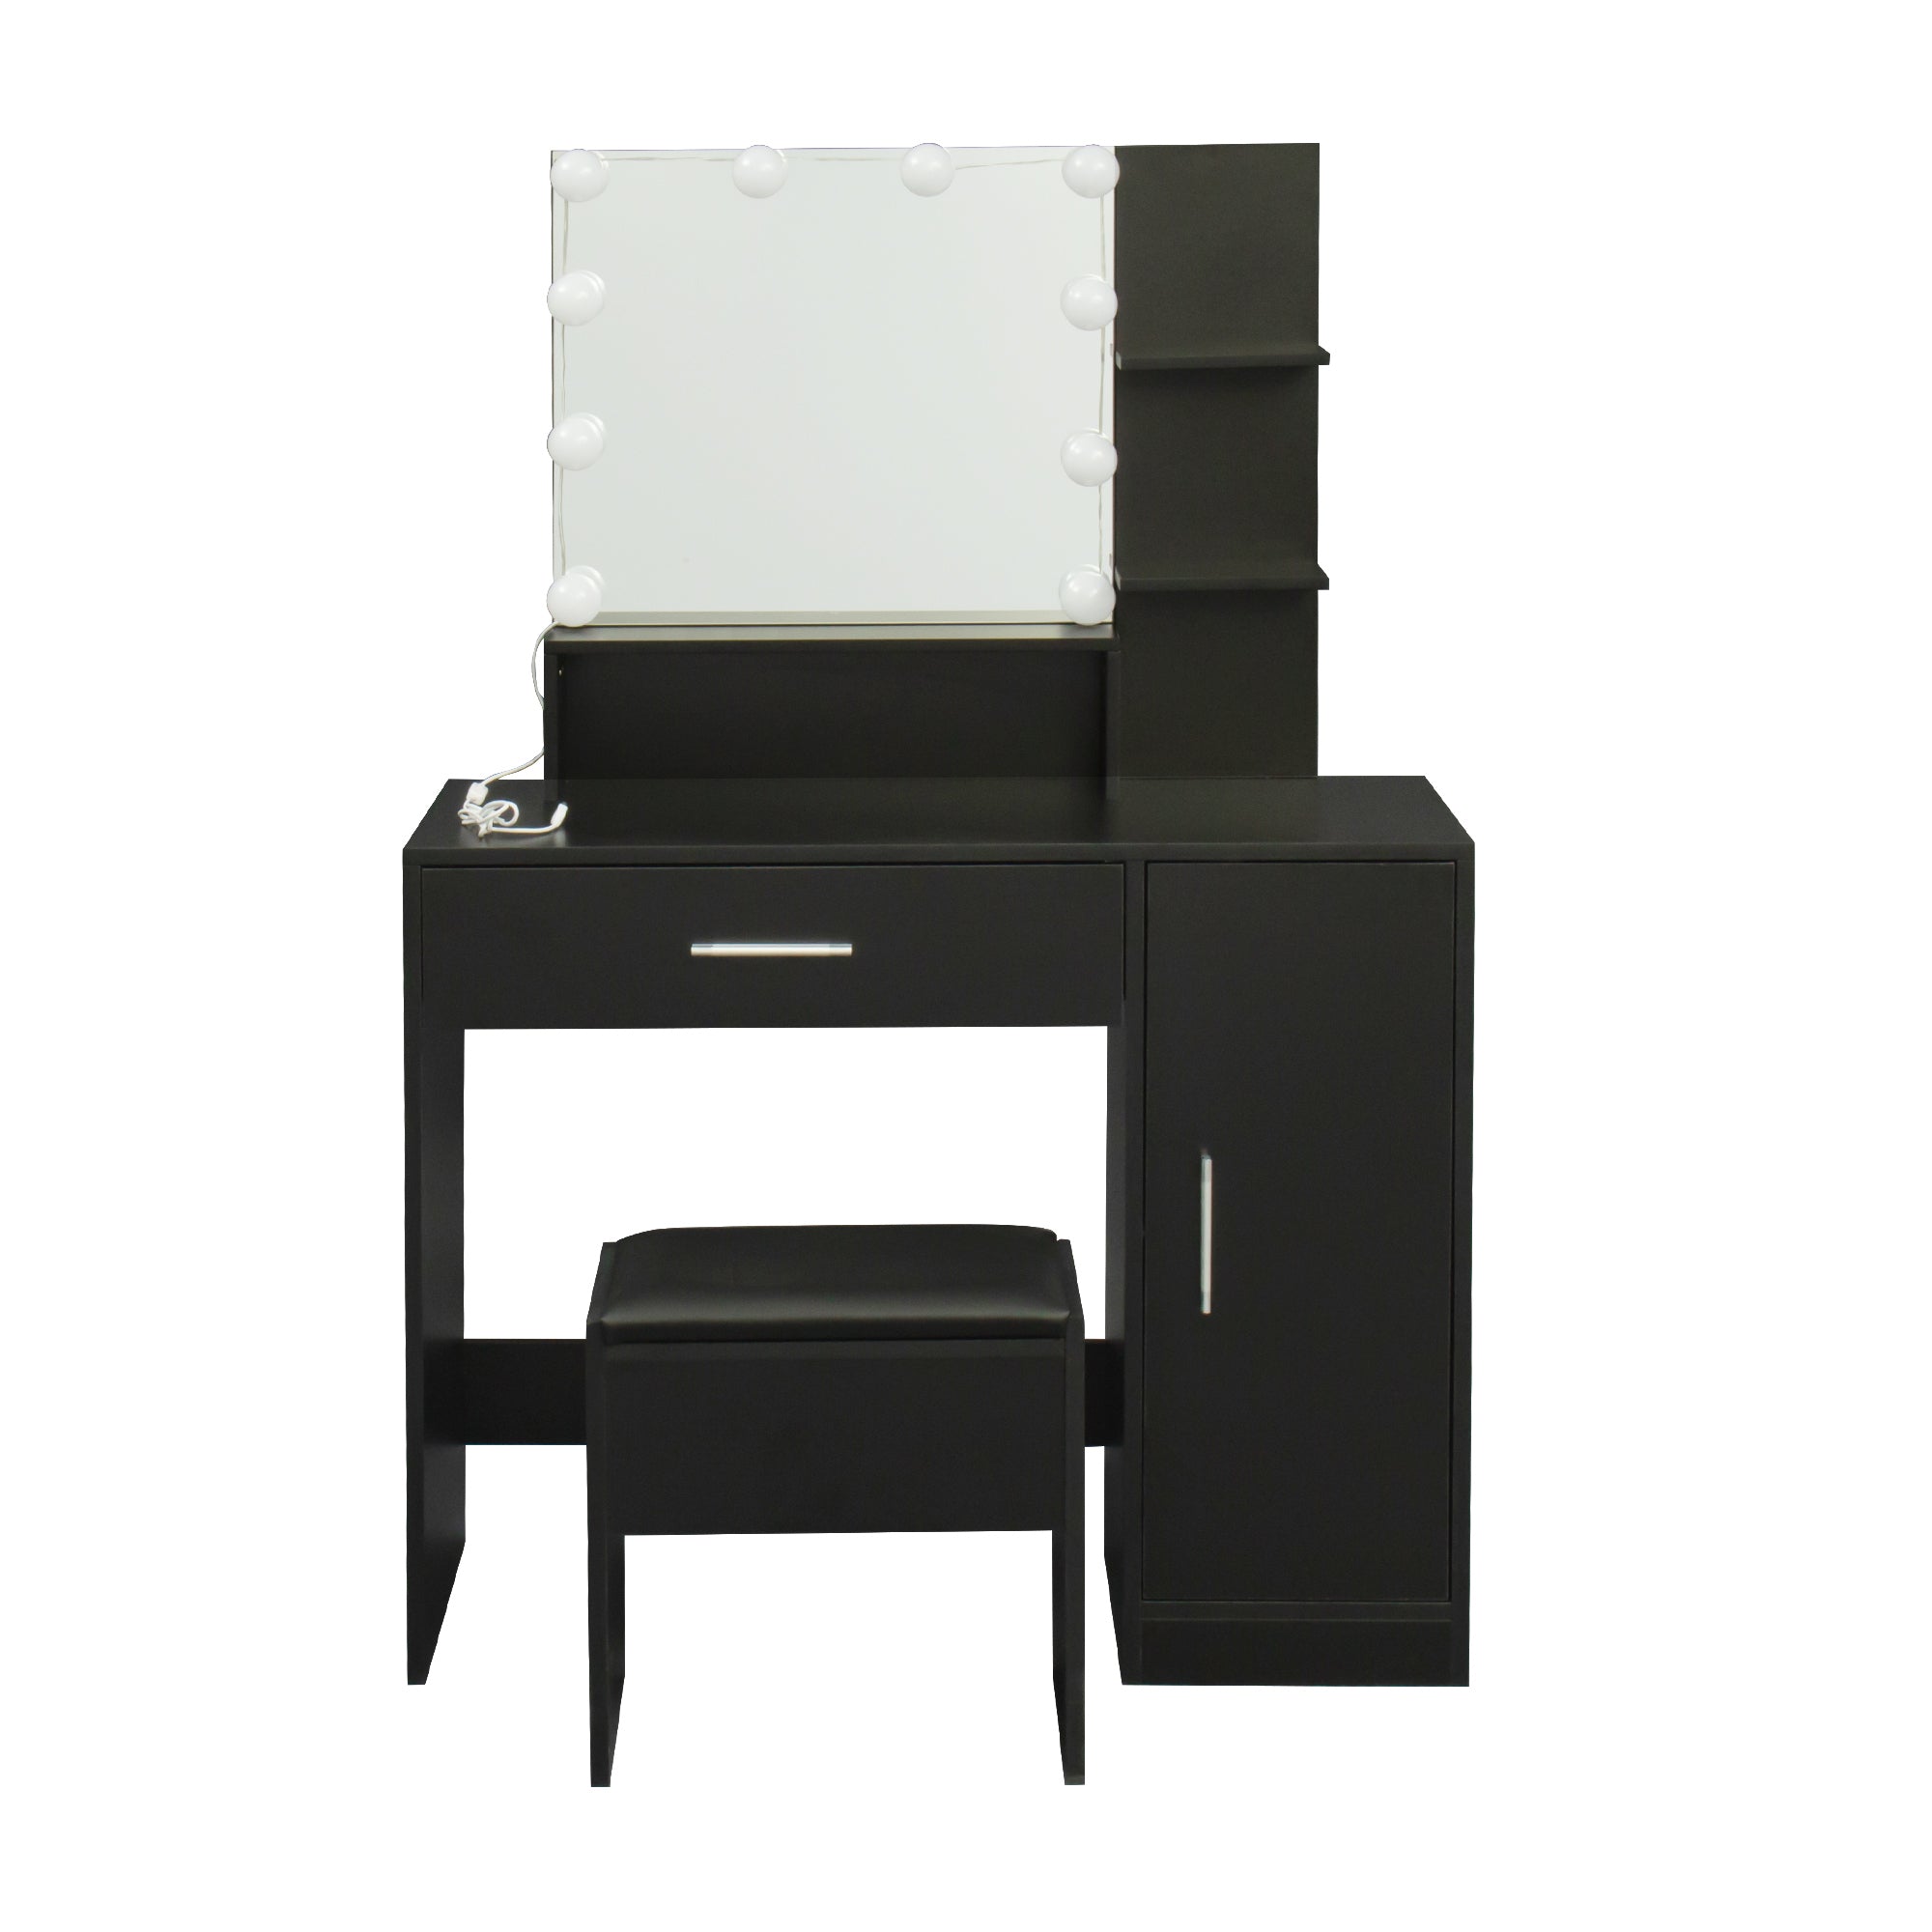 Dressing table with 1 Drawers, 1 cabinet (Black)